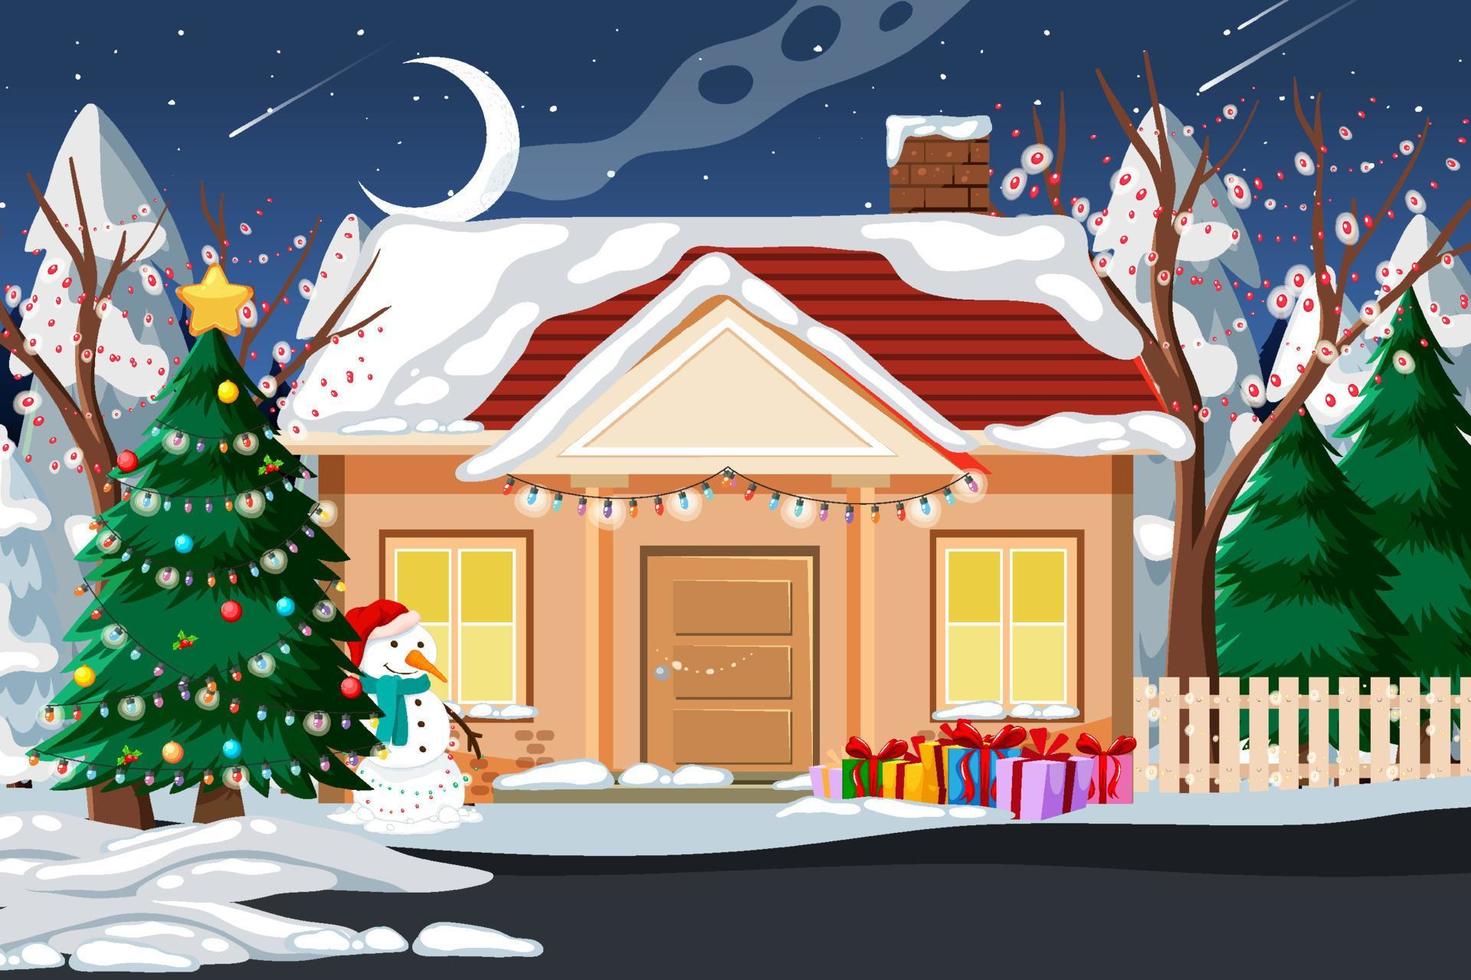 Snow-covered a house and decorated with Christmas decorations vector